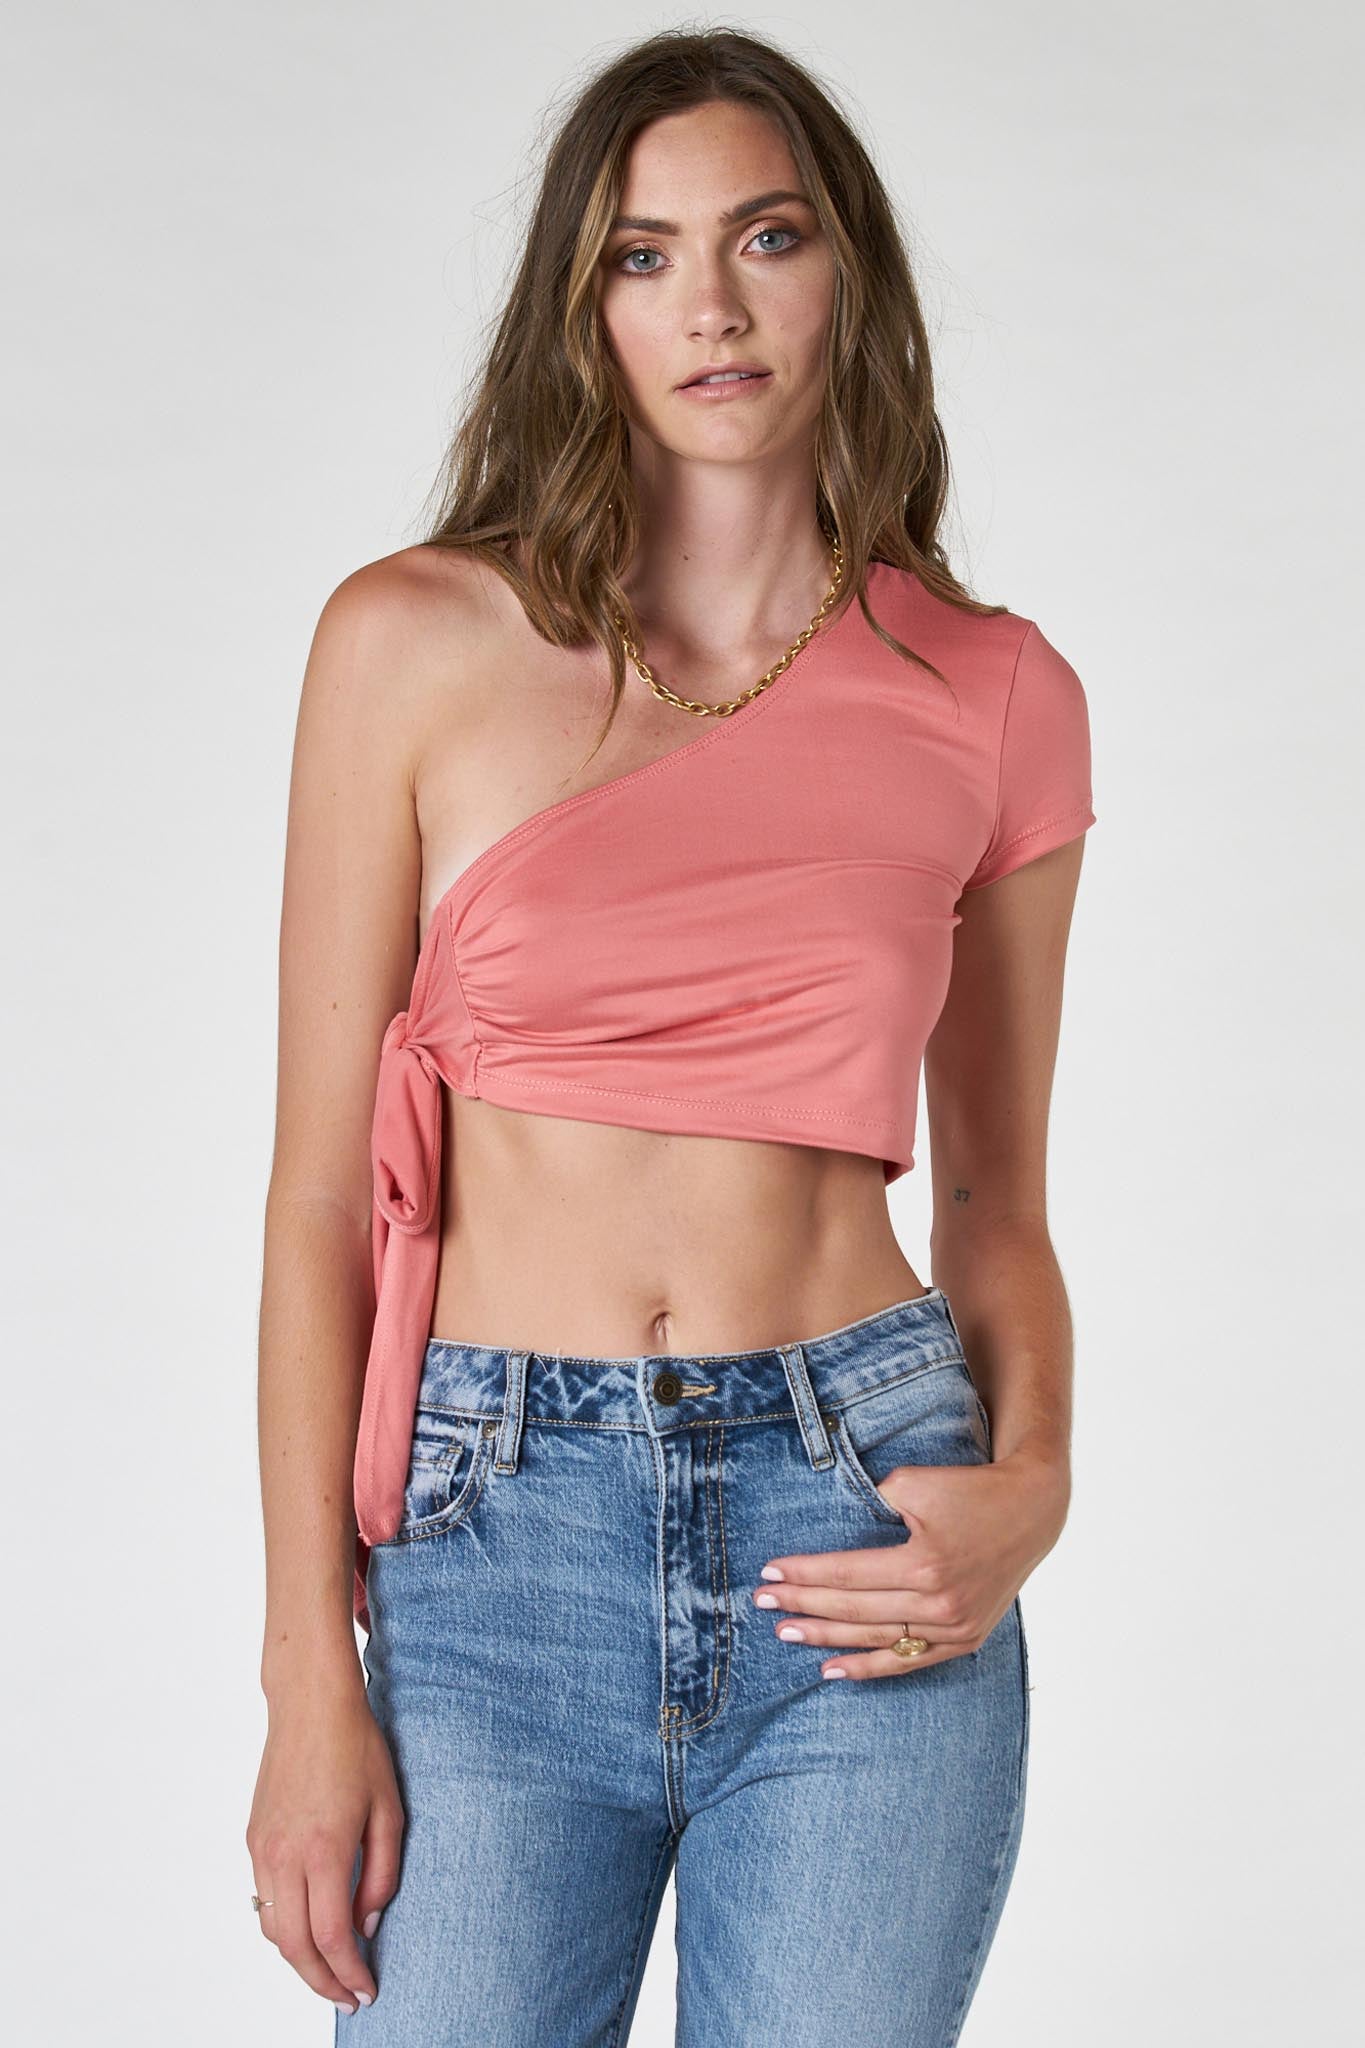 View 1 of Parry Top, a Tops from Larrea Cove. Detail: Keep it simple this season with the ultimate one shoulder cropped Parry Top.